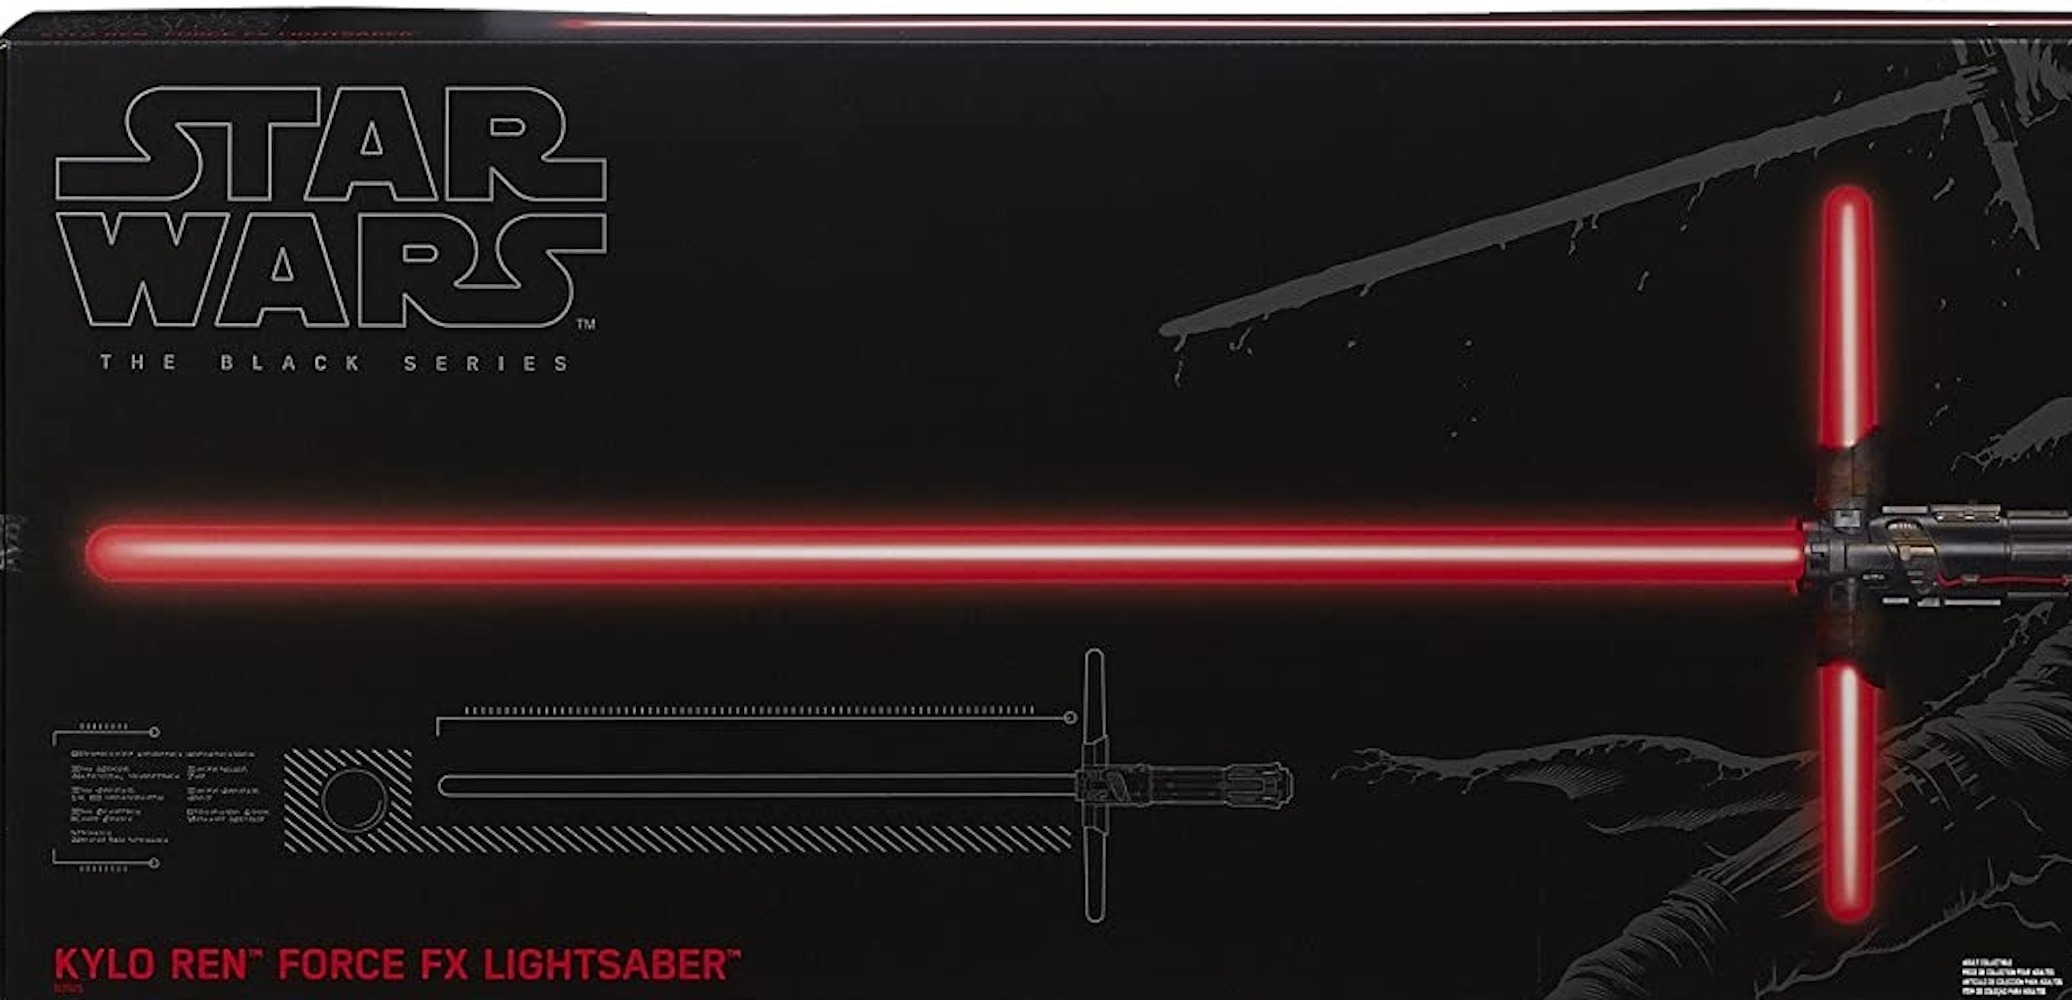 Star Wars The Black Series Kylo Ren Force FX Deluxe Lightsaber $108.60 + Free Shipping w/ Prime